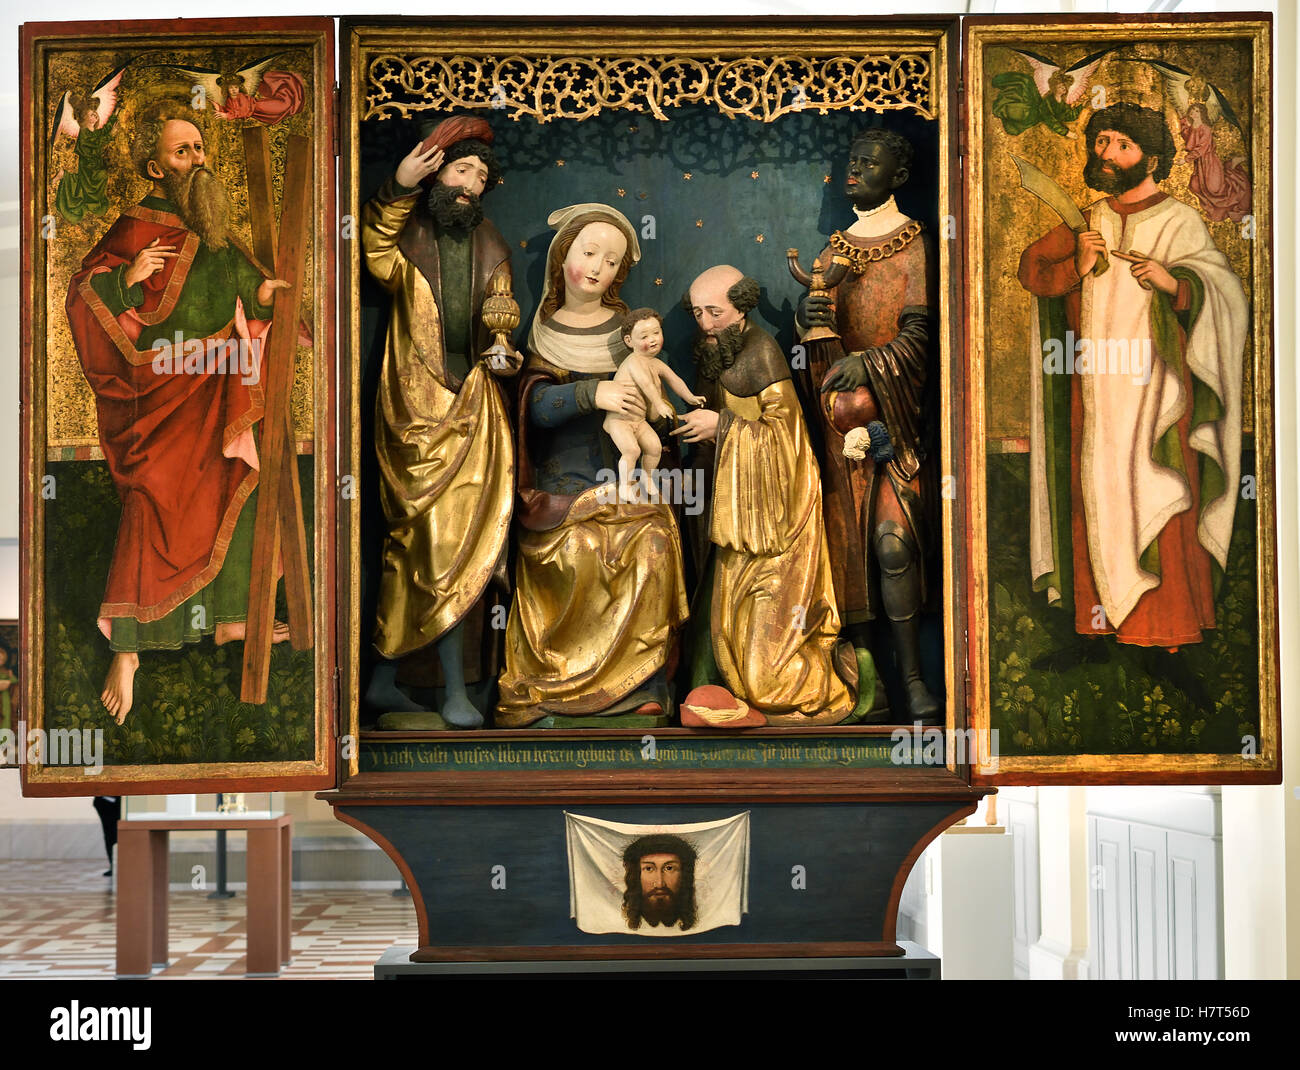 Winged Altarpiece with the Adoration of the Magi in the Shrine 1510 Oberbayern Munich  German Germany Stock Photo